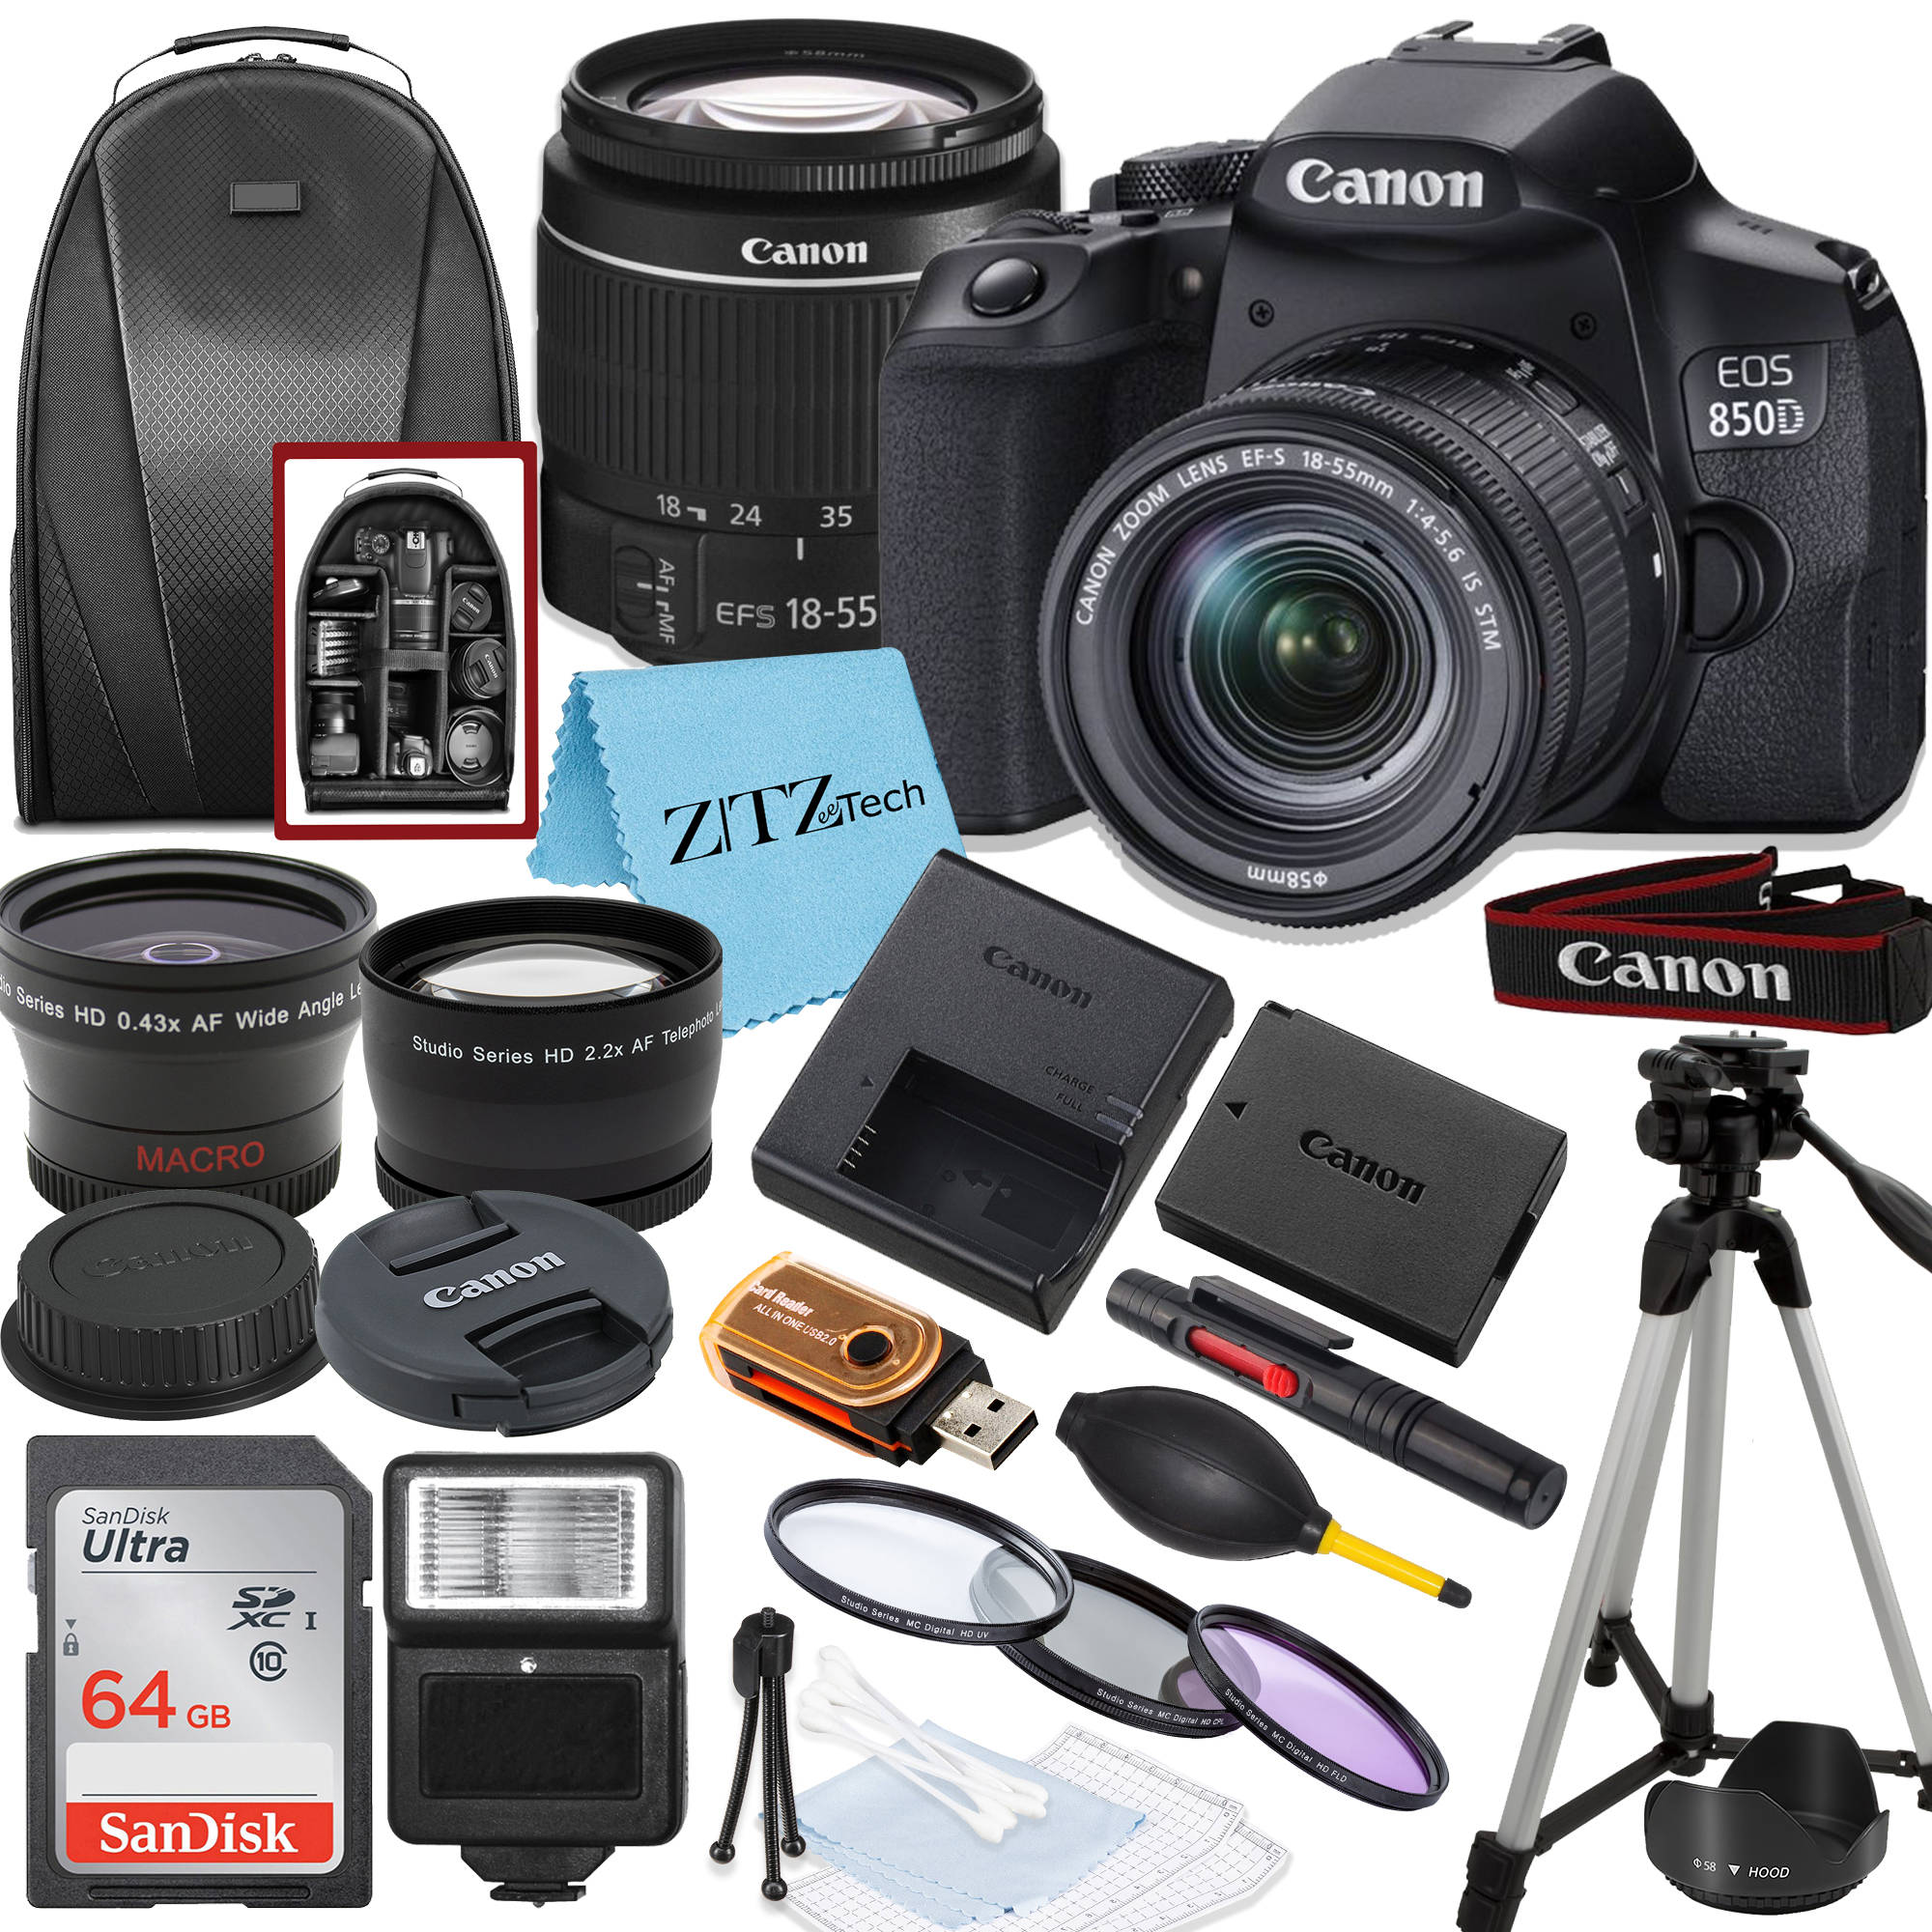 Canon EOS 850D / Rebel T8i DSLR Camera Bundle with 18-55mm Zoom Lens, SanDisk 64GB Memory Card, Backpack and ZeeTech Accessory